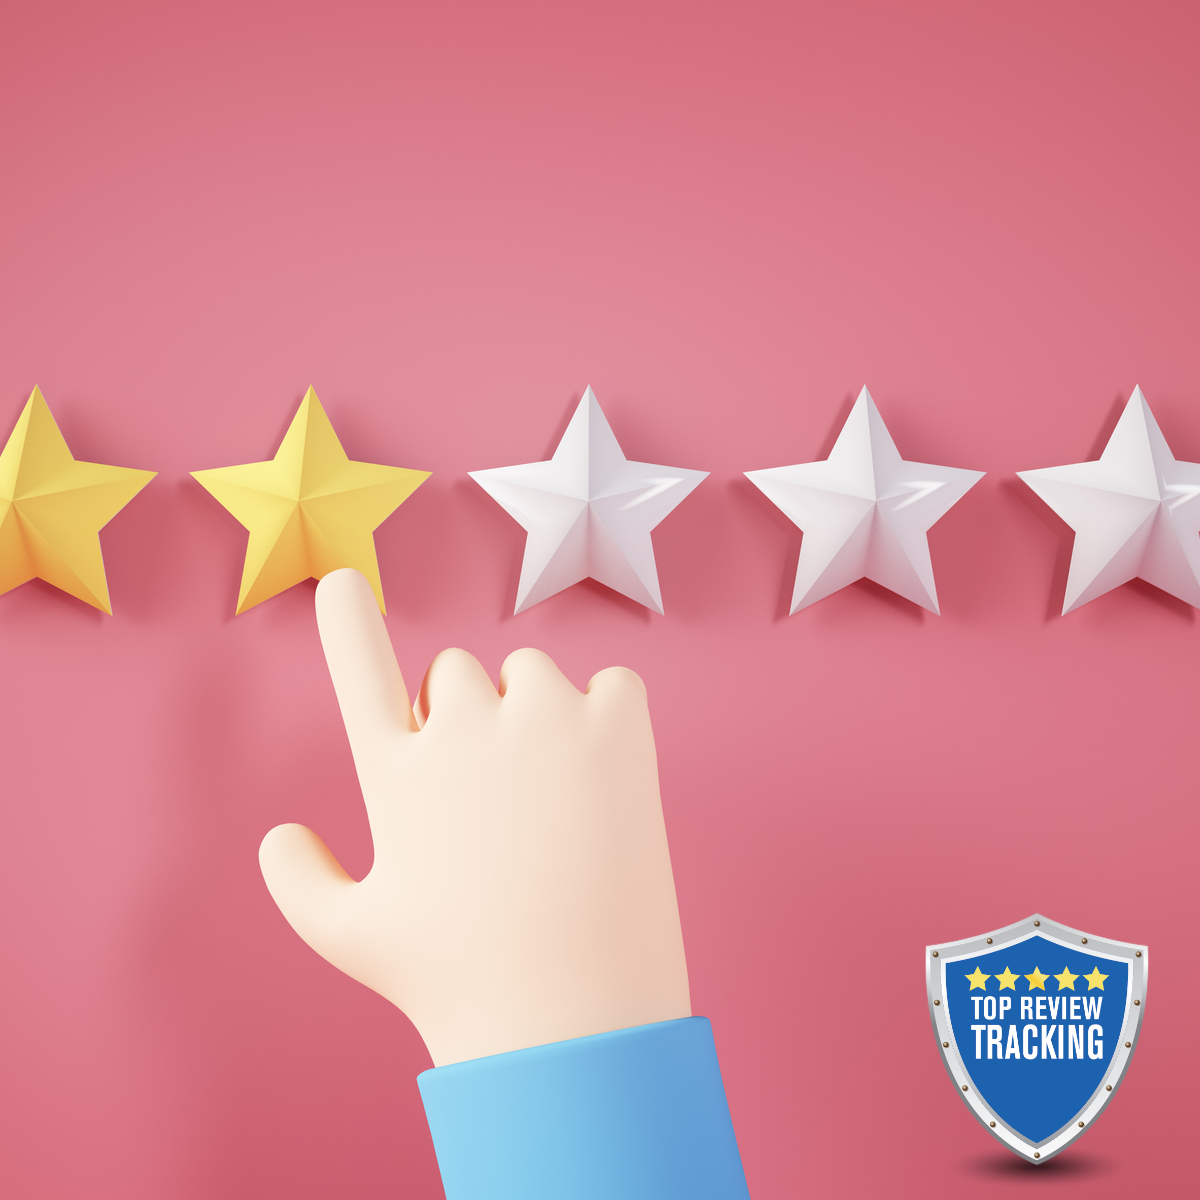 Learn What Top Review Tracking Software Can Do For You